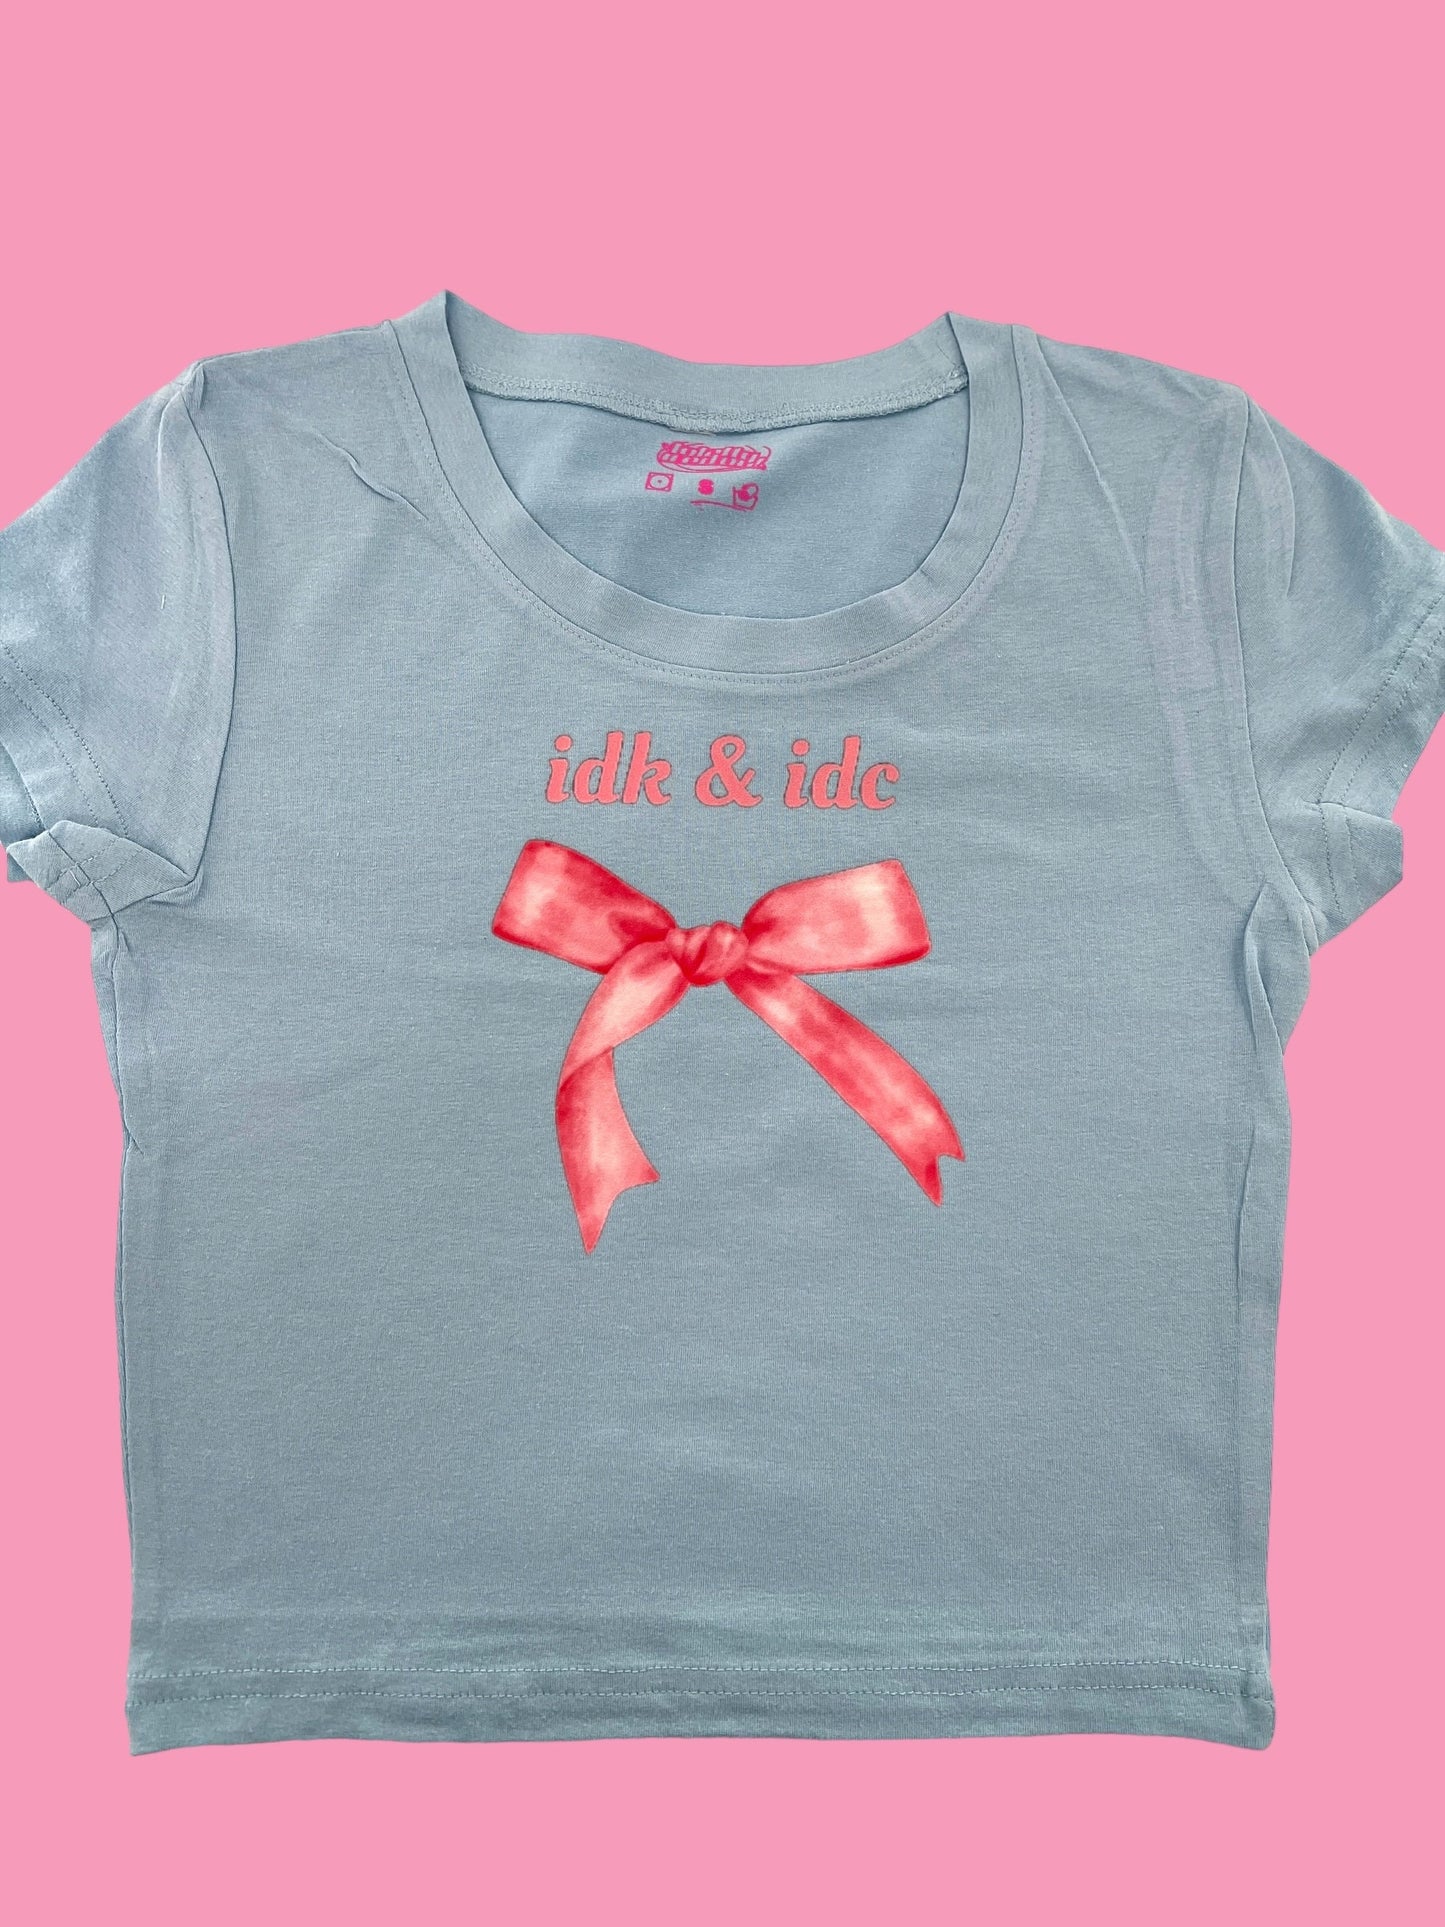 a blue t - shirt with a red bow on it